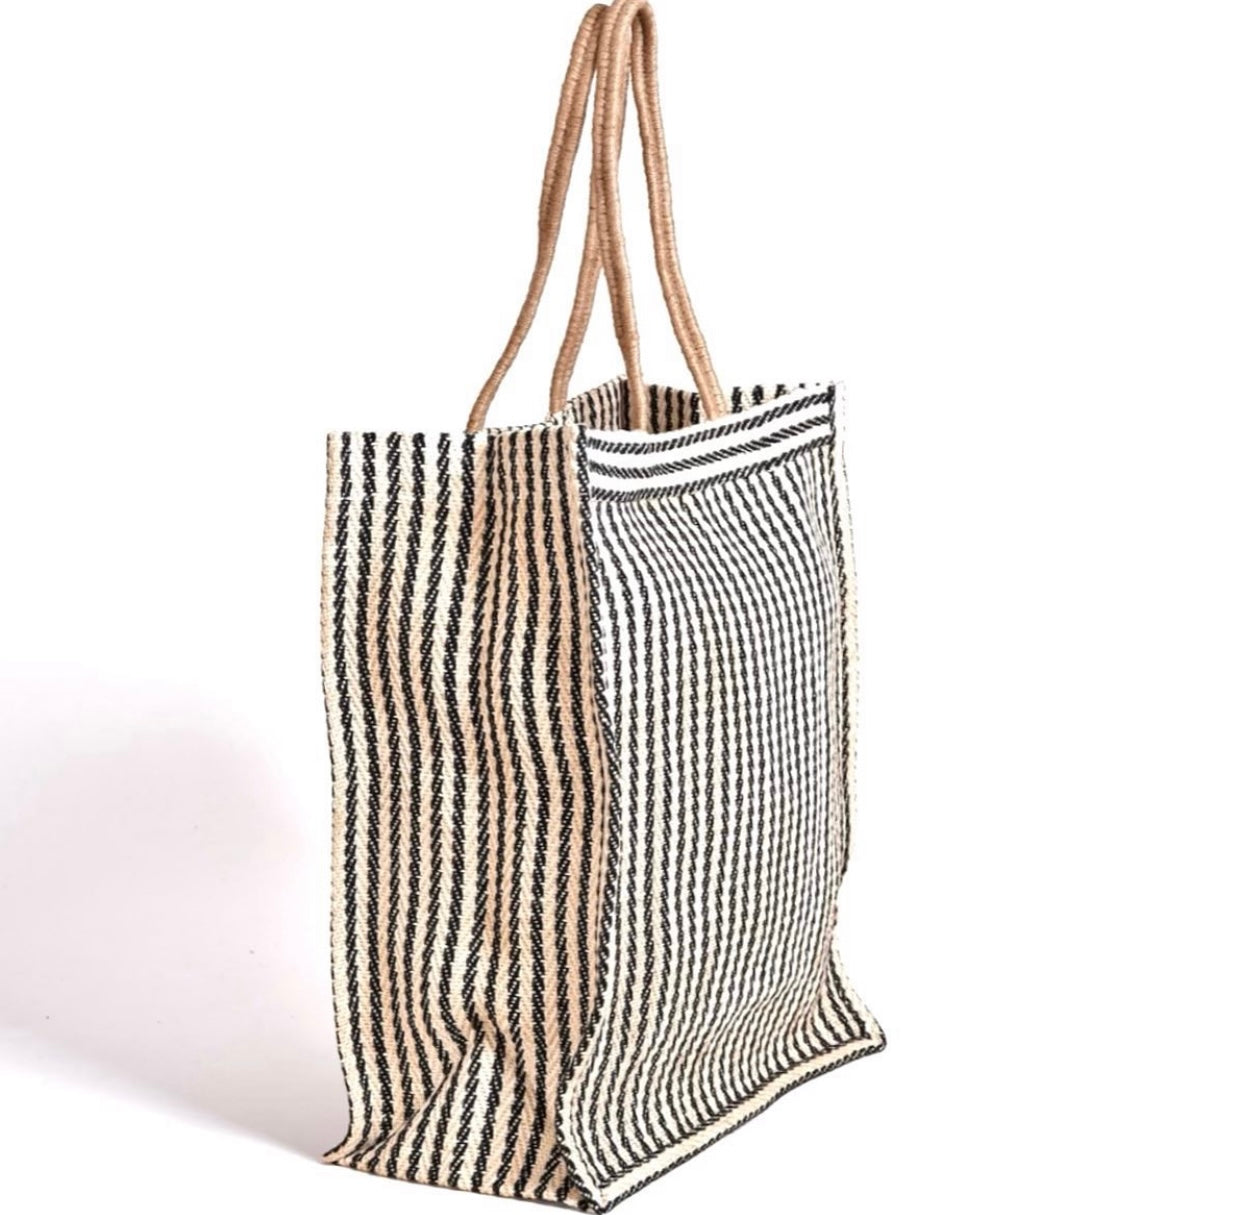 Striped Tote Bag - Bagel&Griff